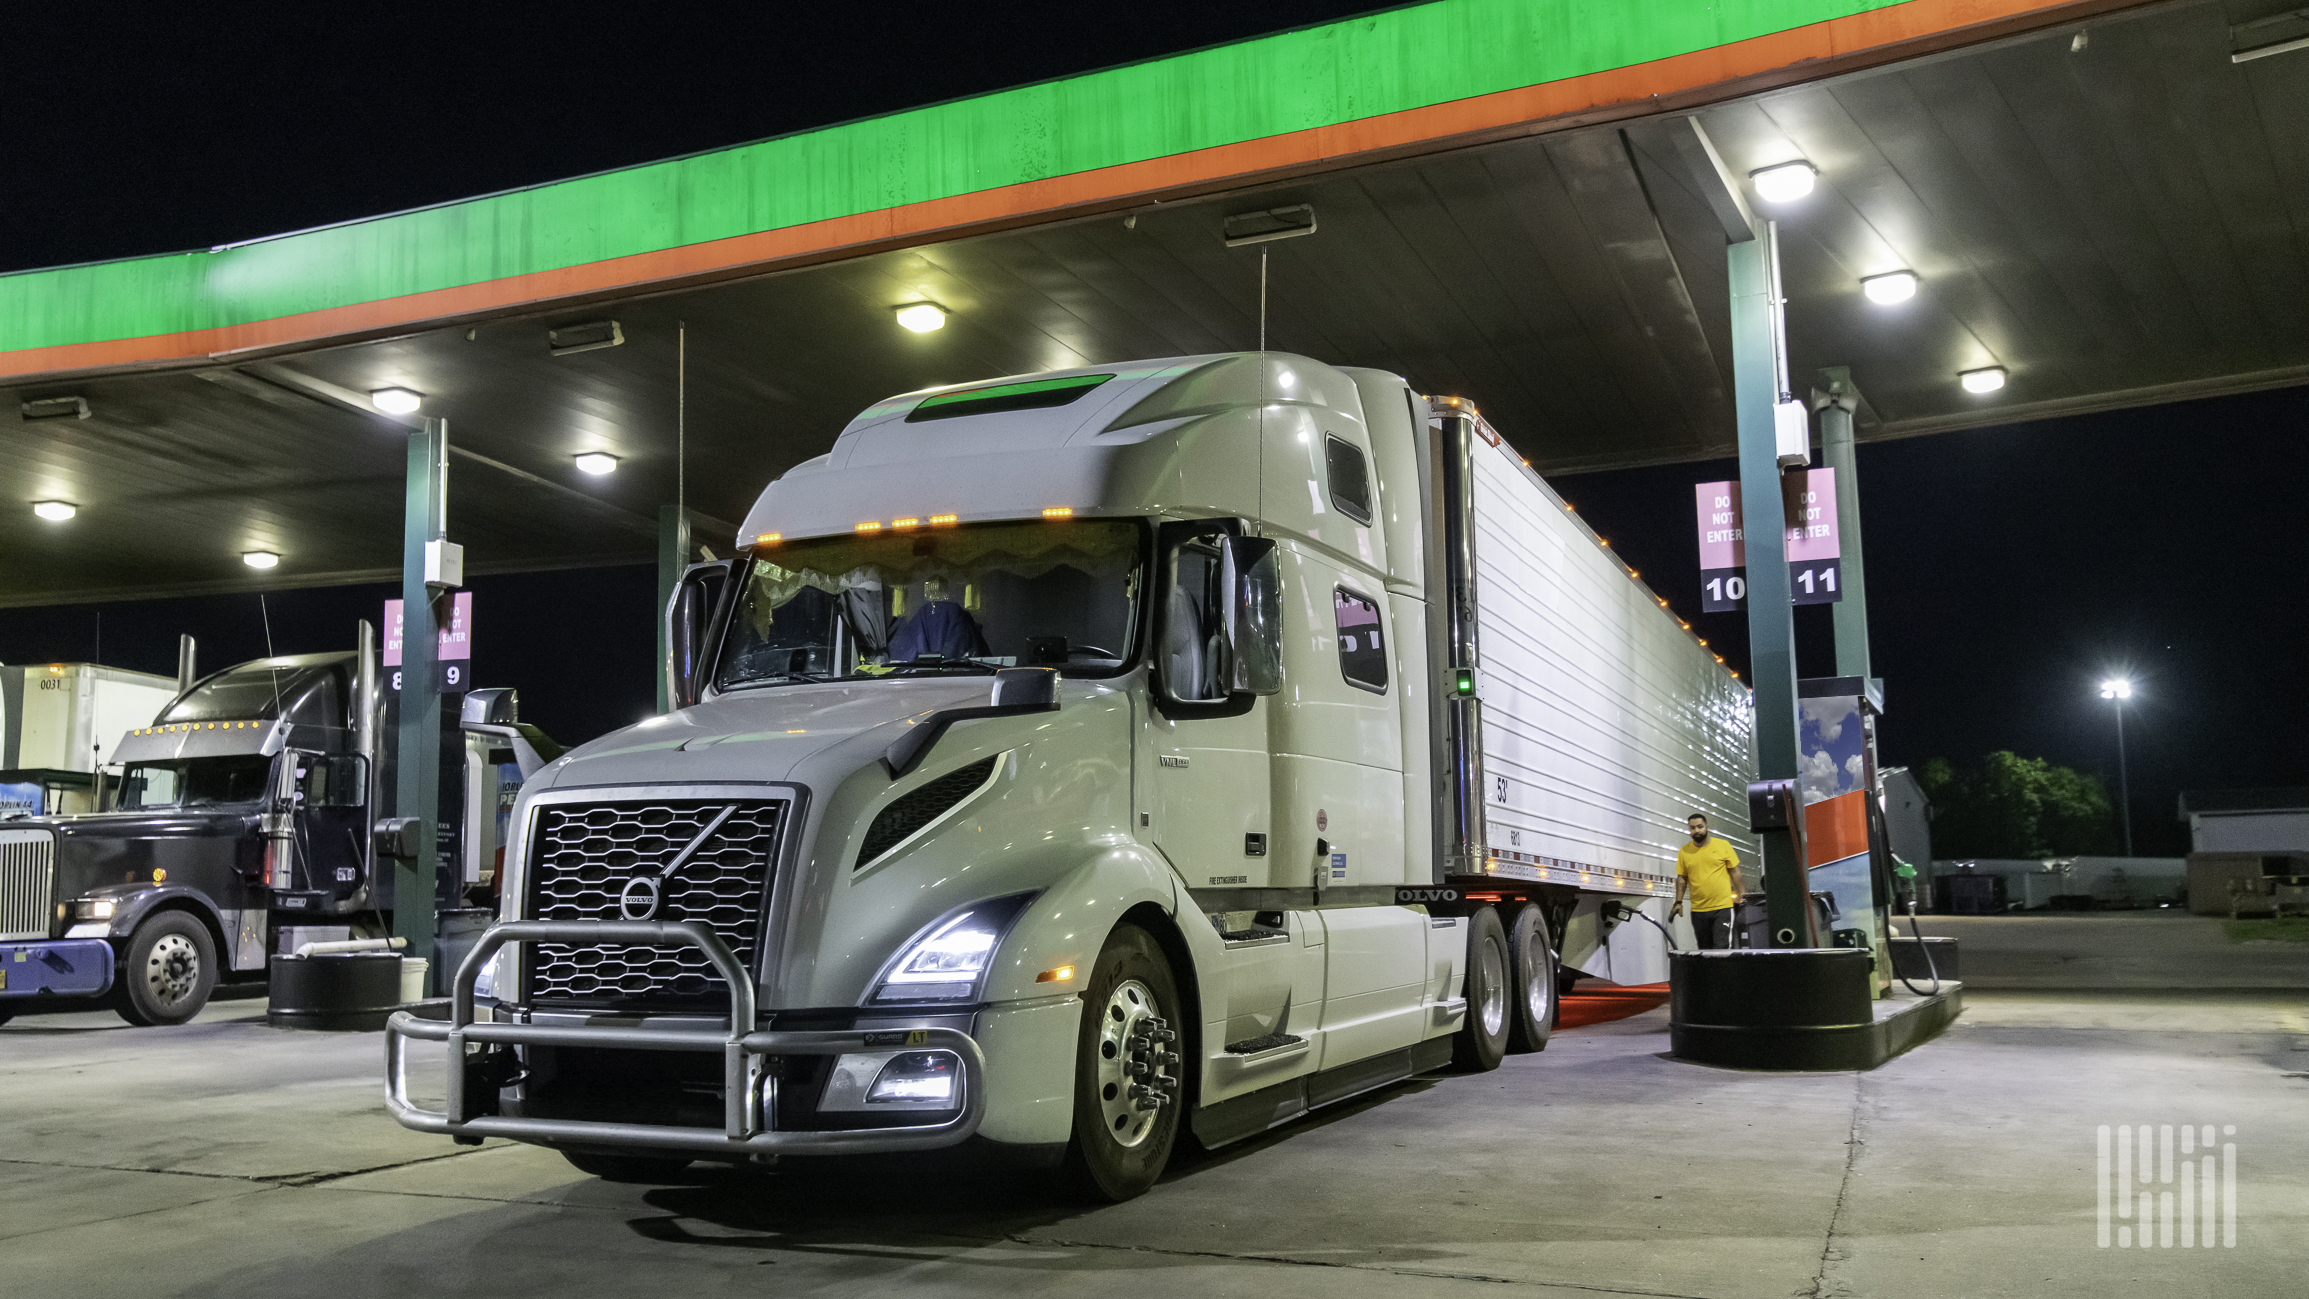 Marine fuels boosted diesel prices in 2022, but future impact unclear